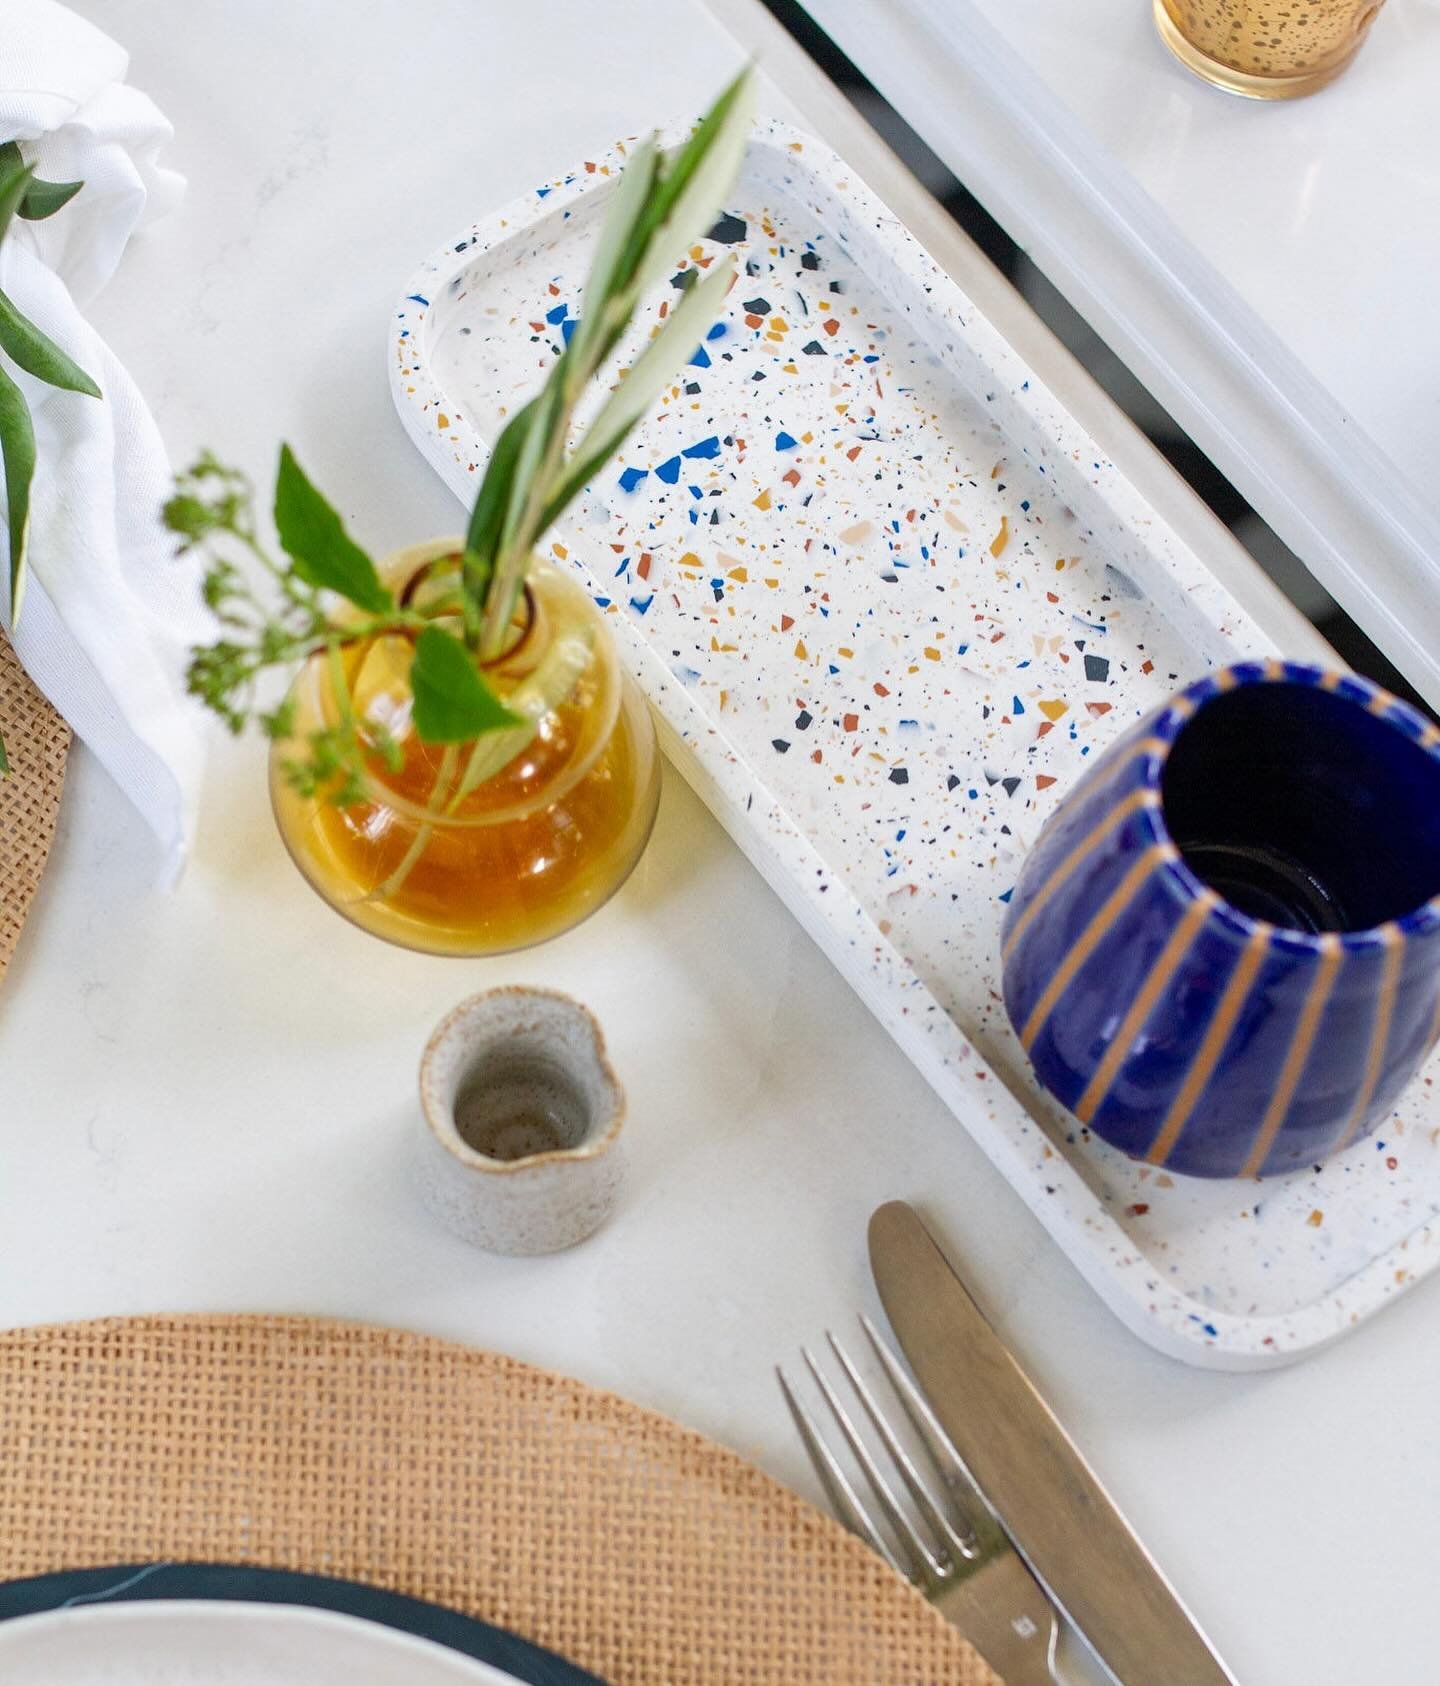 Summer dinner parties here we come!

It&rsquo;s definitely time to start planning garden party tablescapes - and what better way to refresh for the new season than with a touch of terrazzo?

🌞🍐💫🥥💐✨🍑

📷: @jesshowellphoto 

&bull;
&bull;
&bull;
